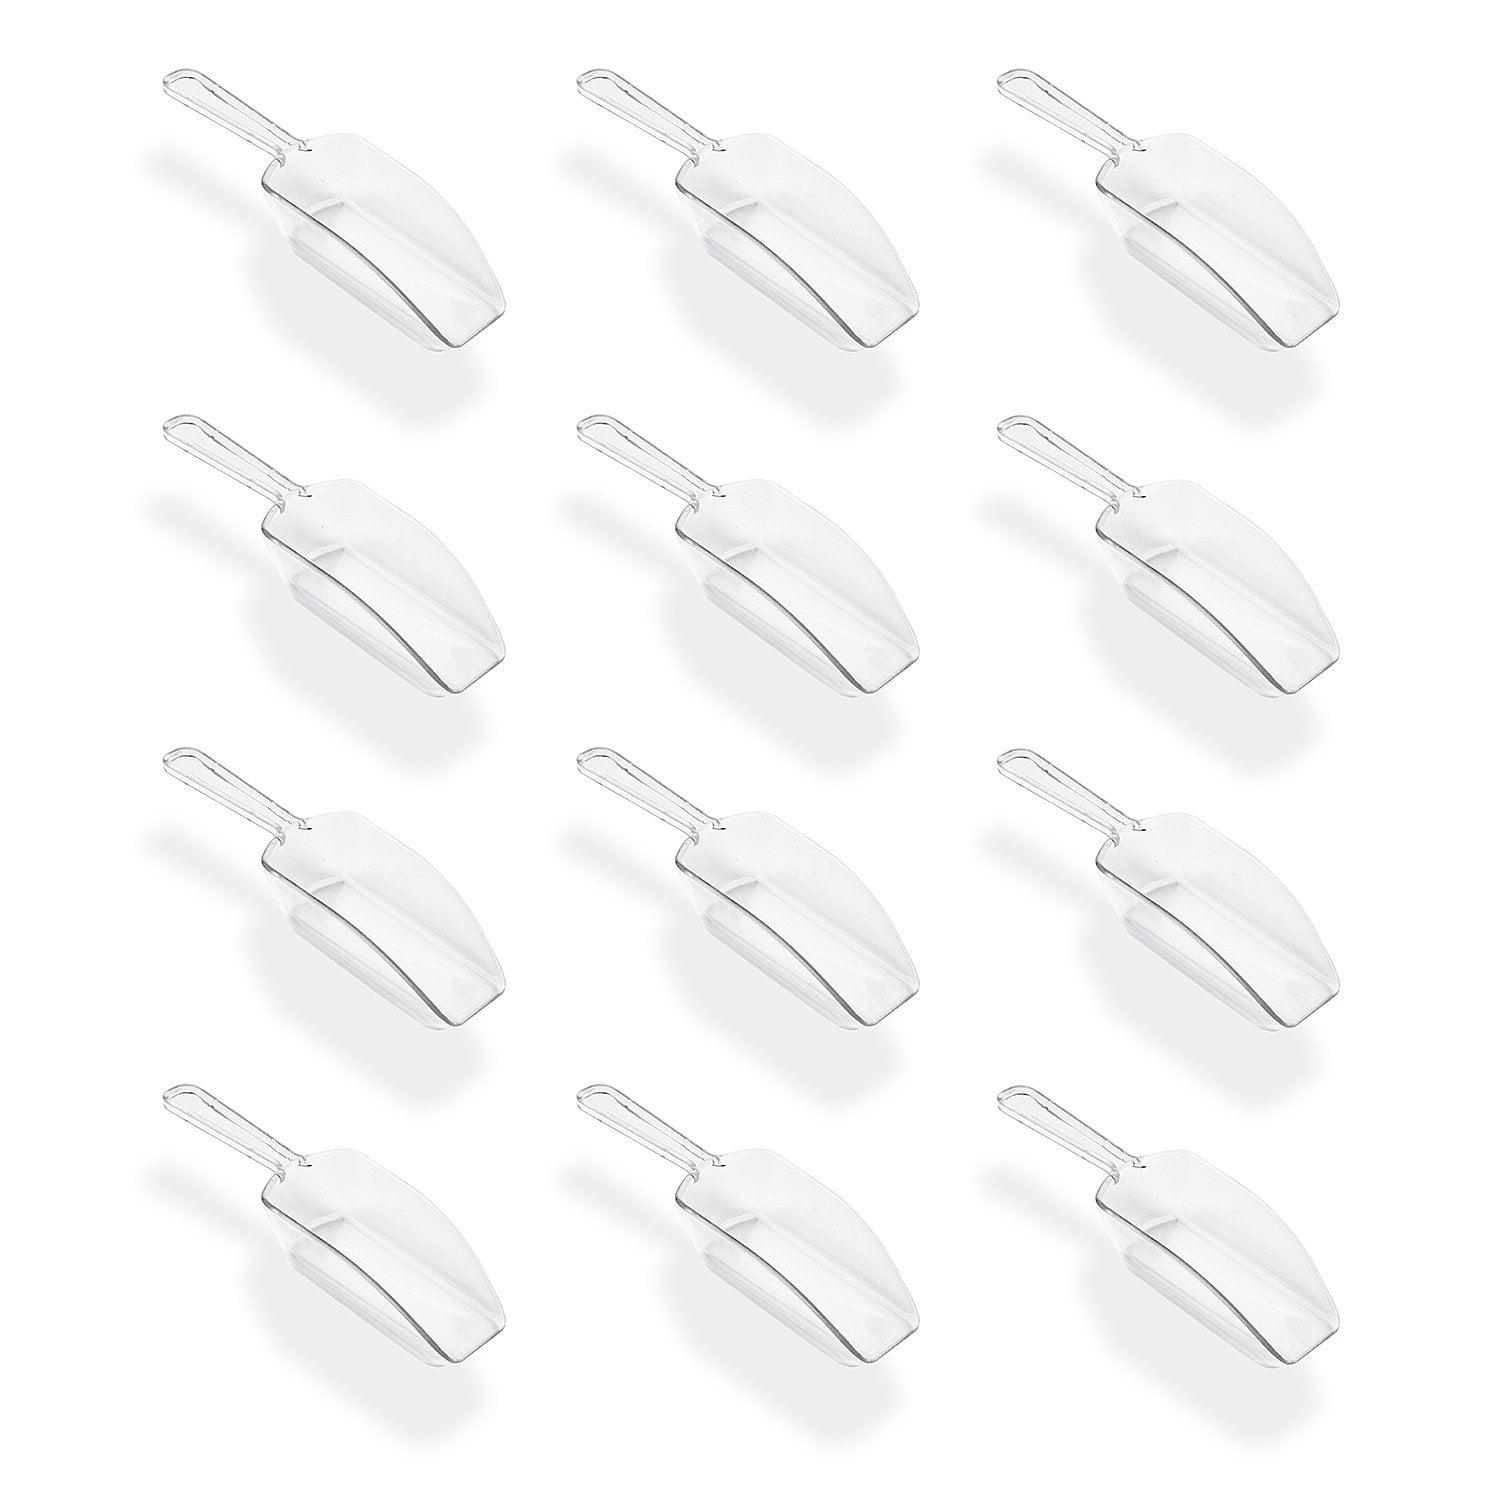 Plastic Candy Scoops Serving-ware, 6-1/2-inch, 6-Piece, Clear